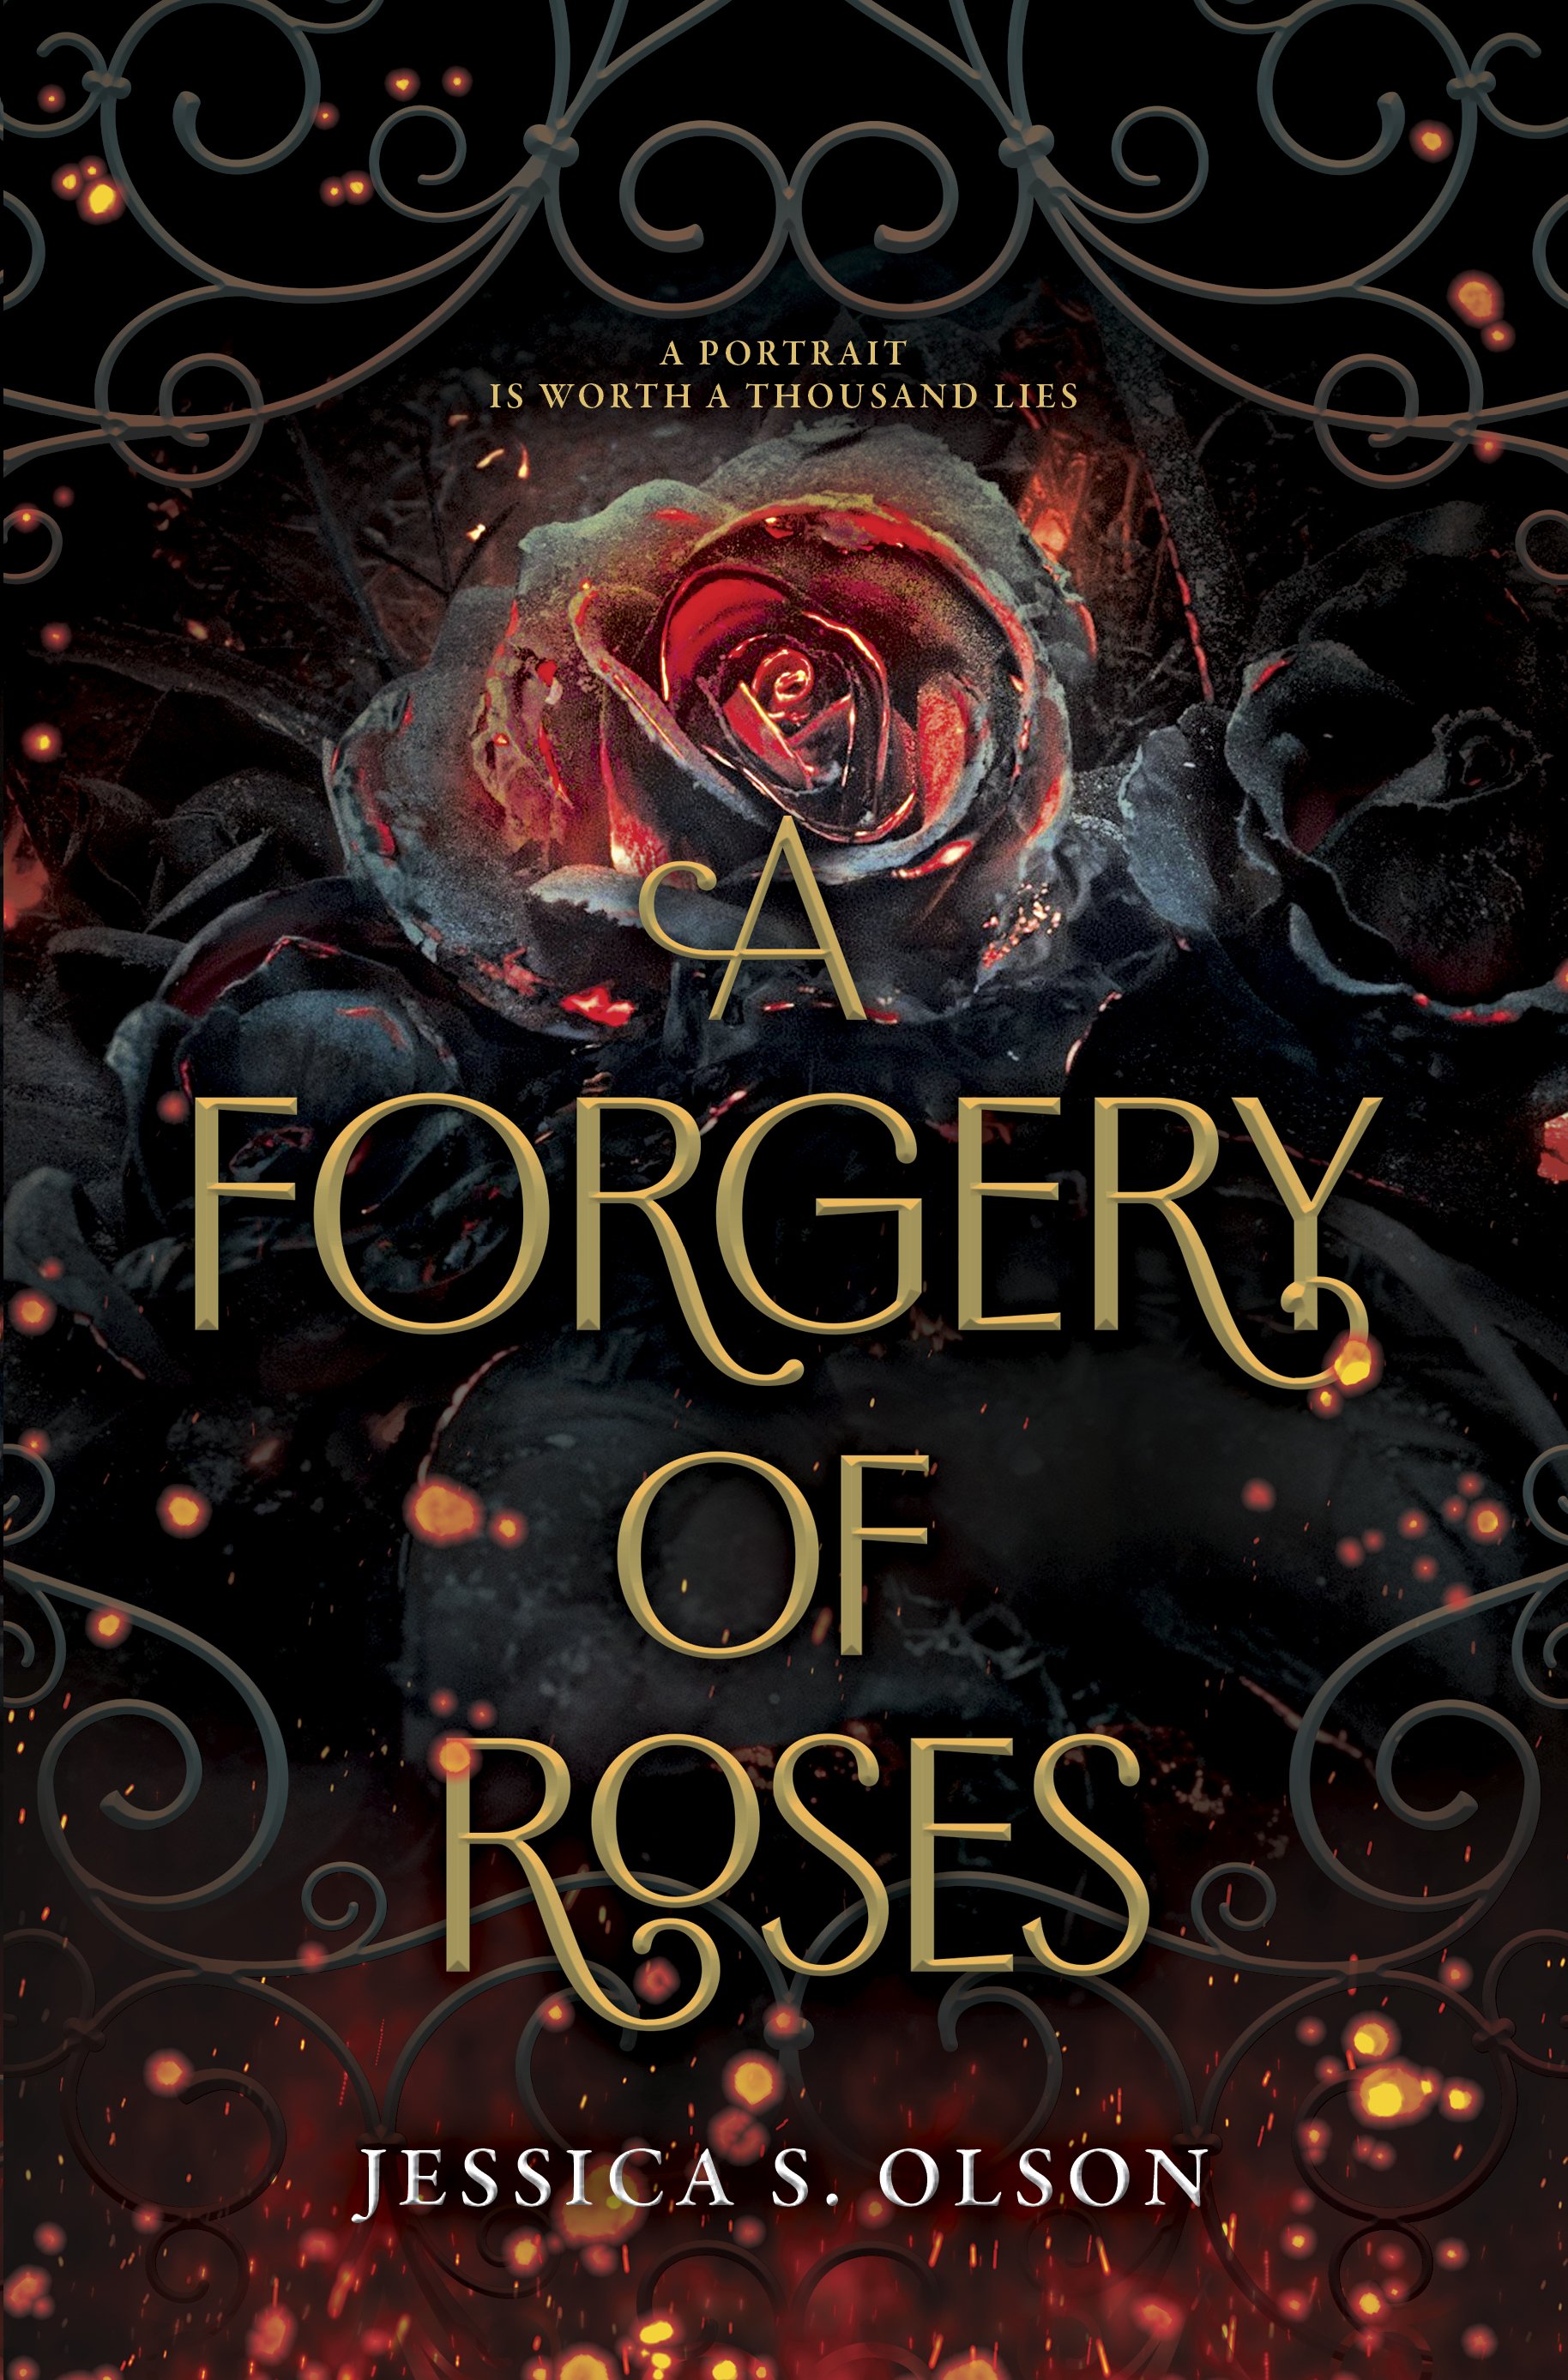 3. Mar 29 2022 A Forgery of Roses.jpg